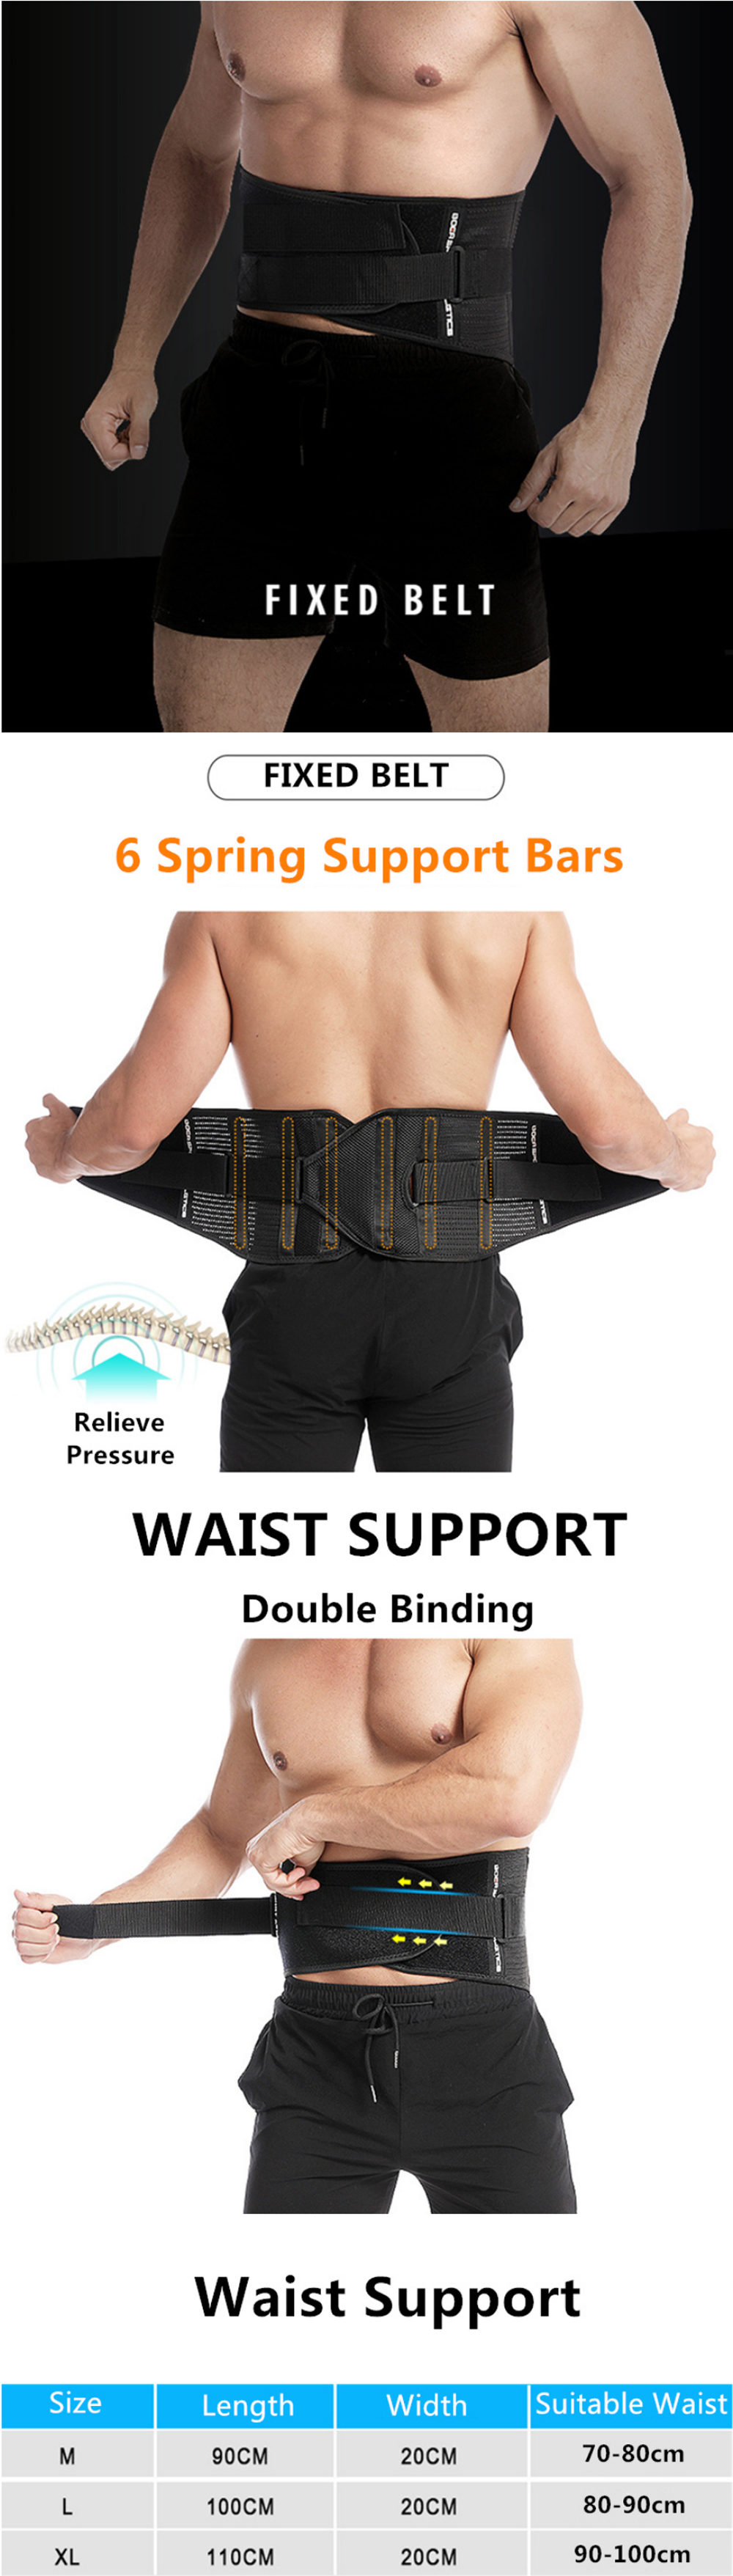 BOER-Waist-Support-Lumbar-Sports-Safety-Brace-Belt-with-Metal-Spring-Strip-for-Gym-Fitness-Weightlif-1769558-1